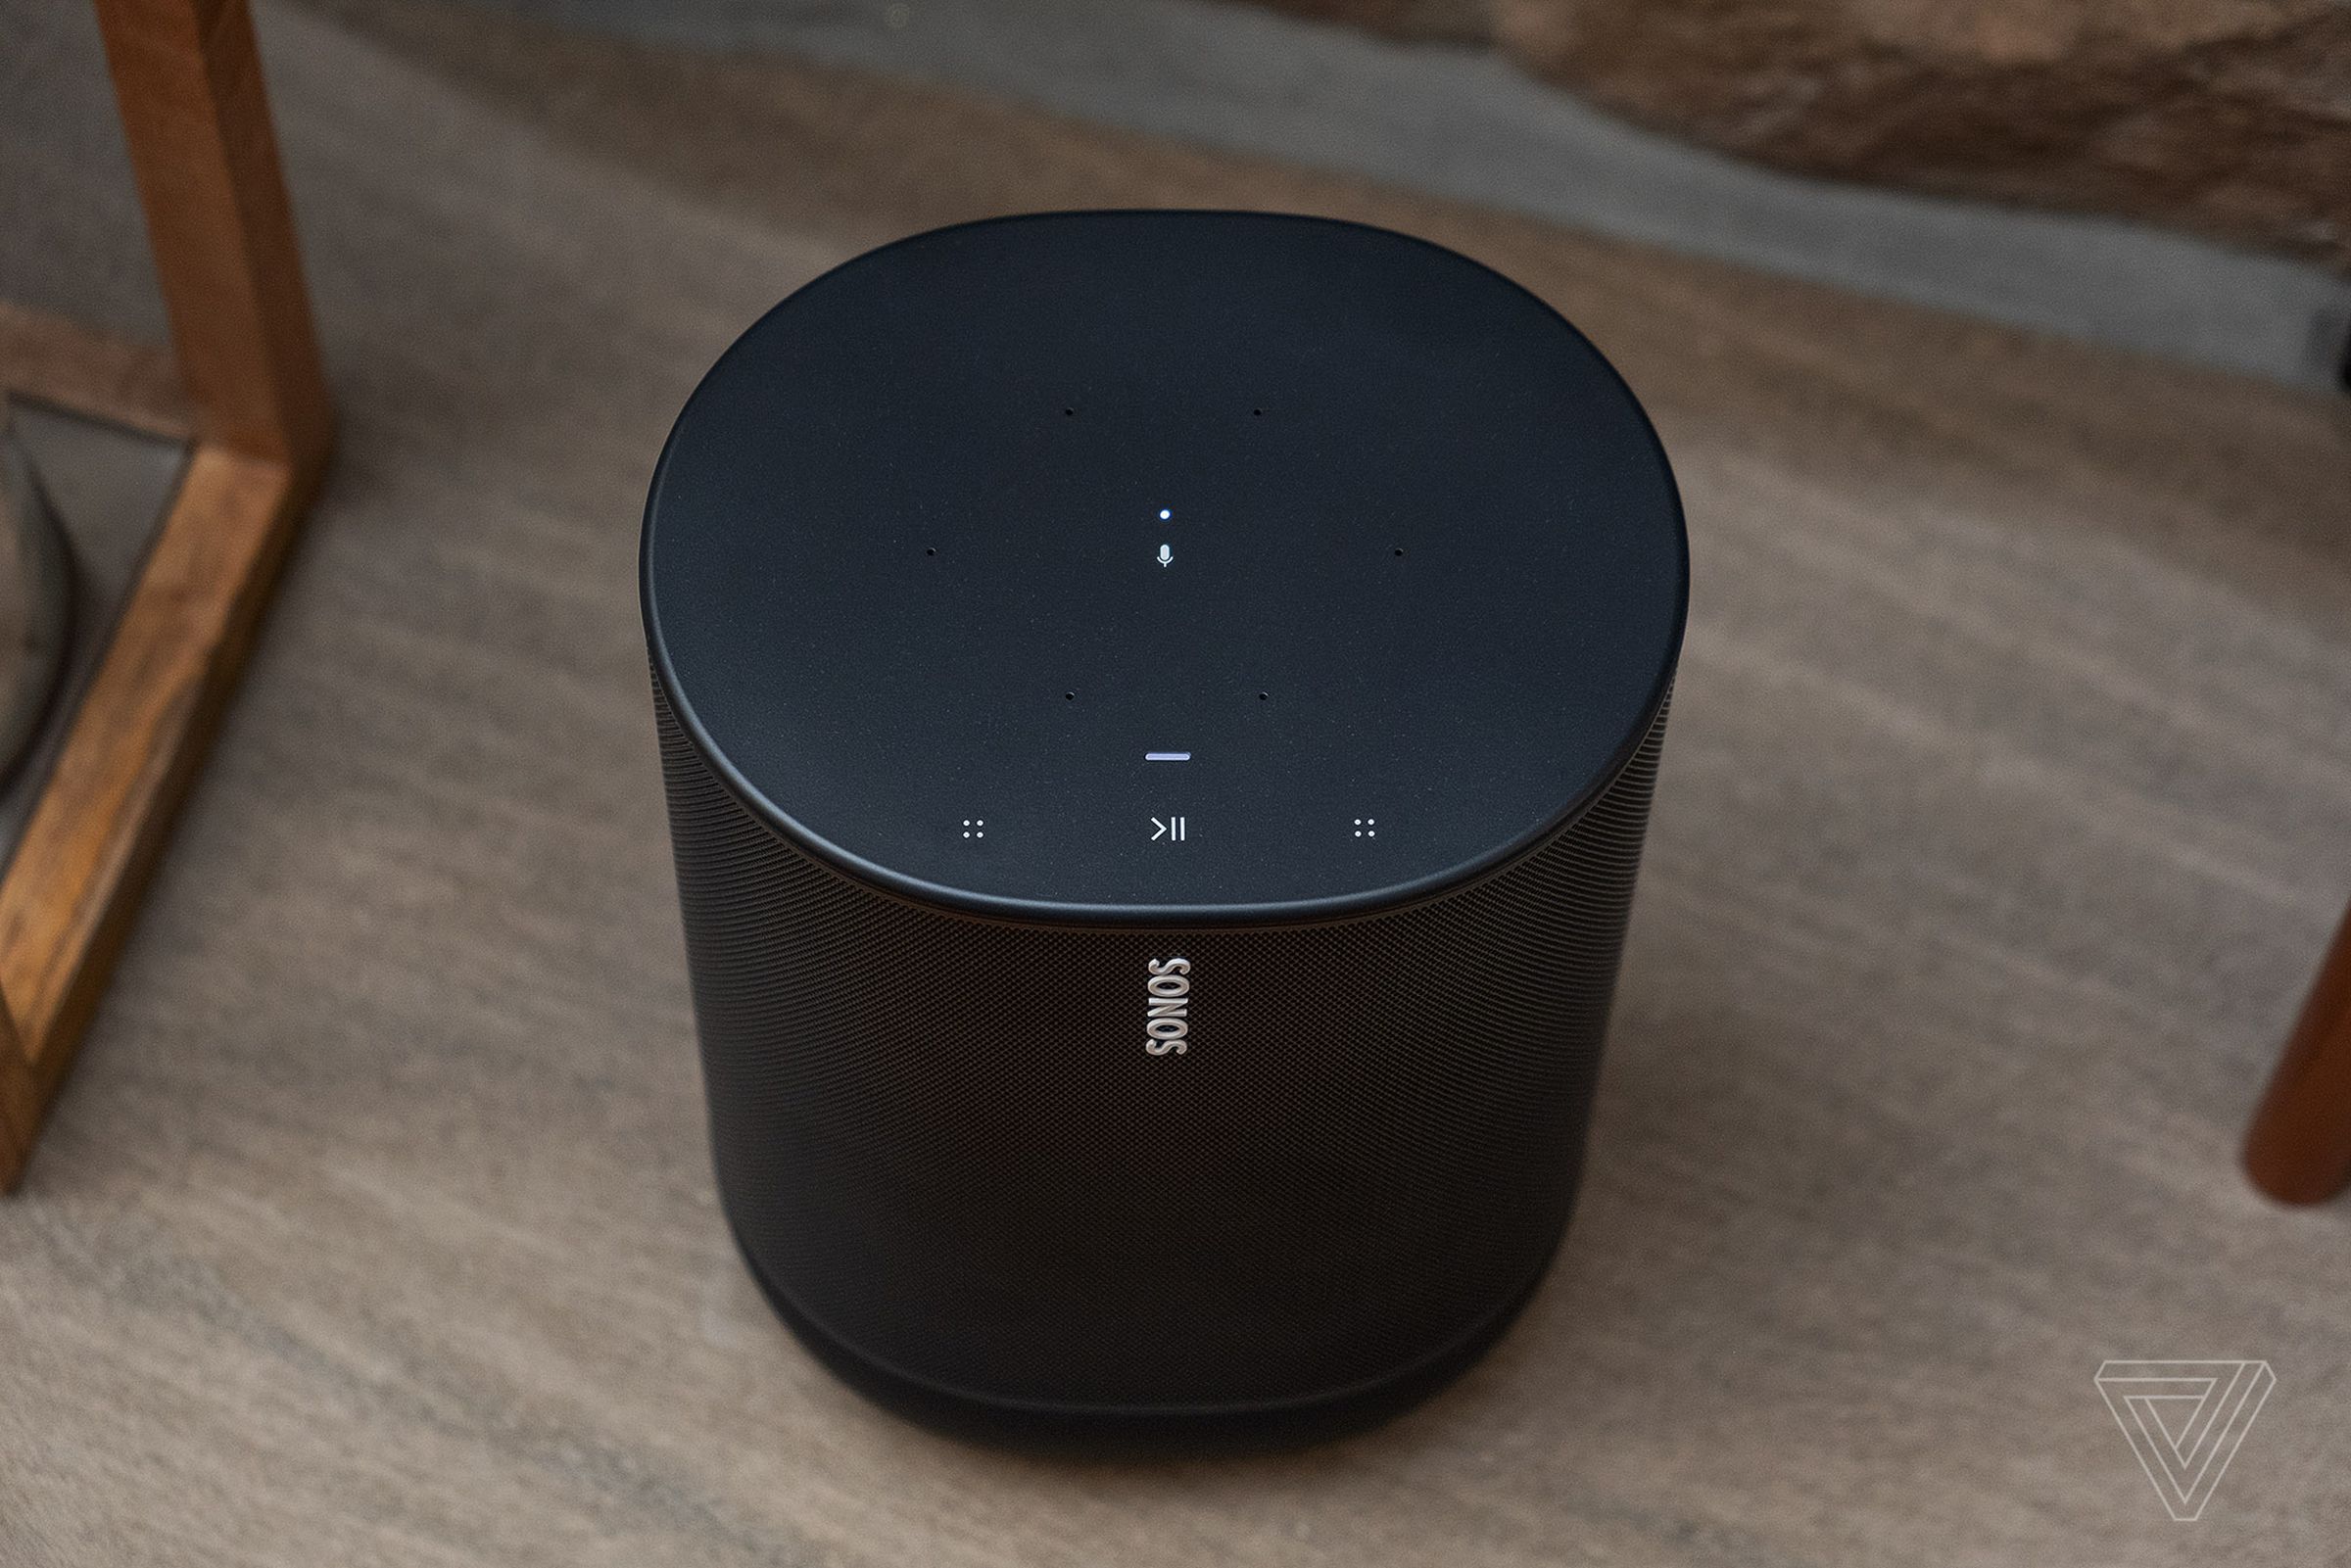 A photo of the Sonos Move speaker.